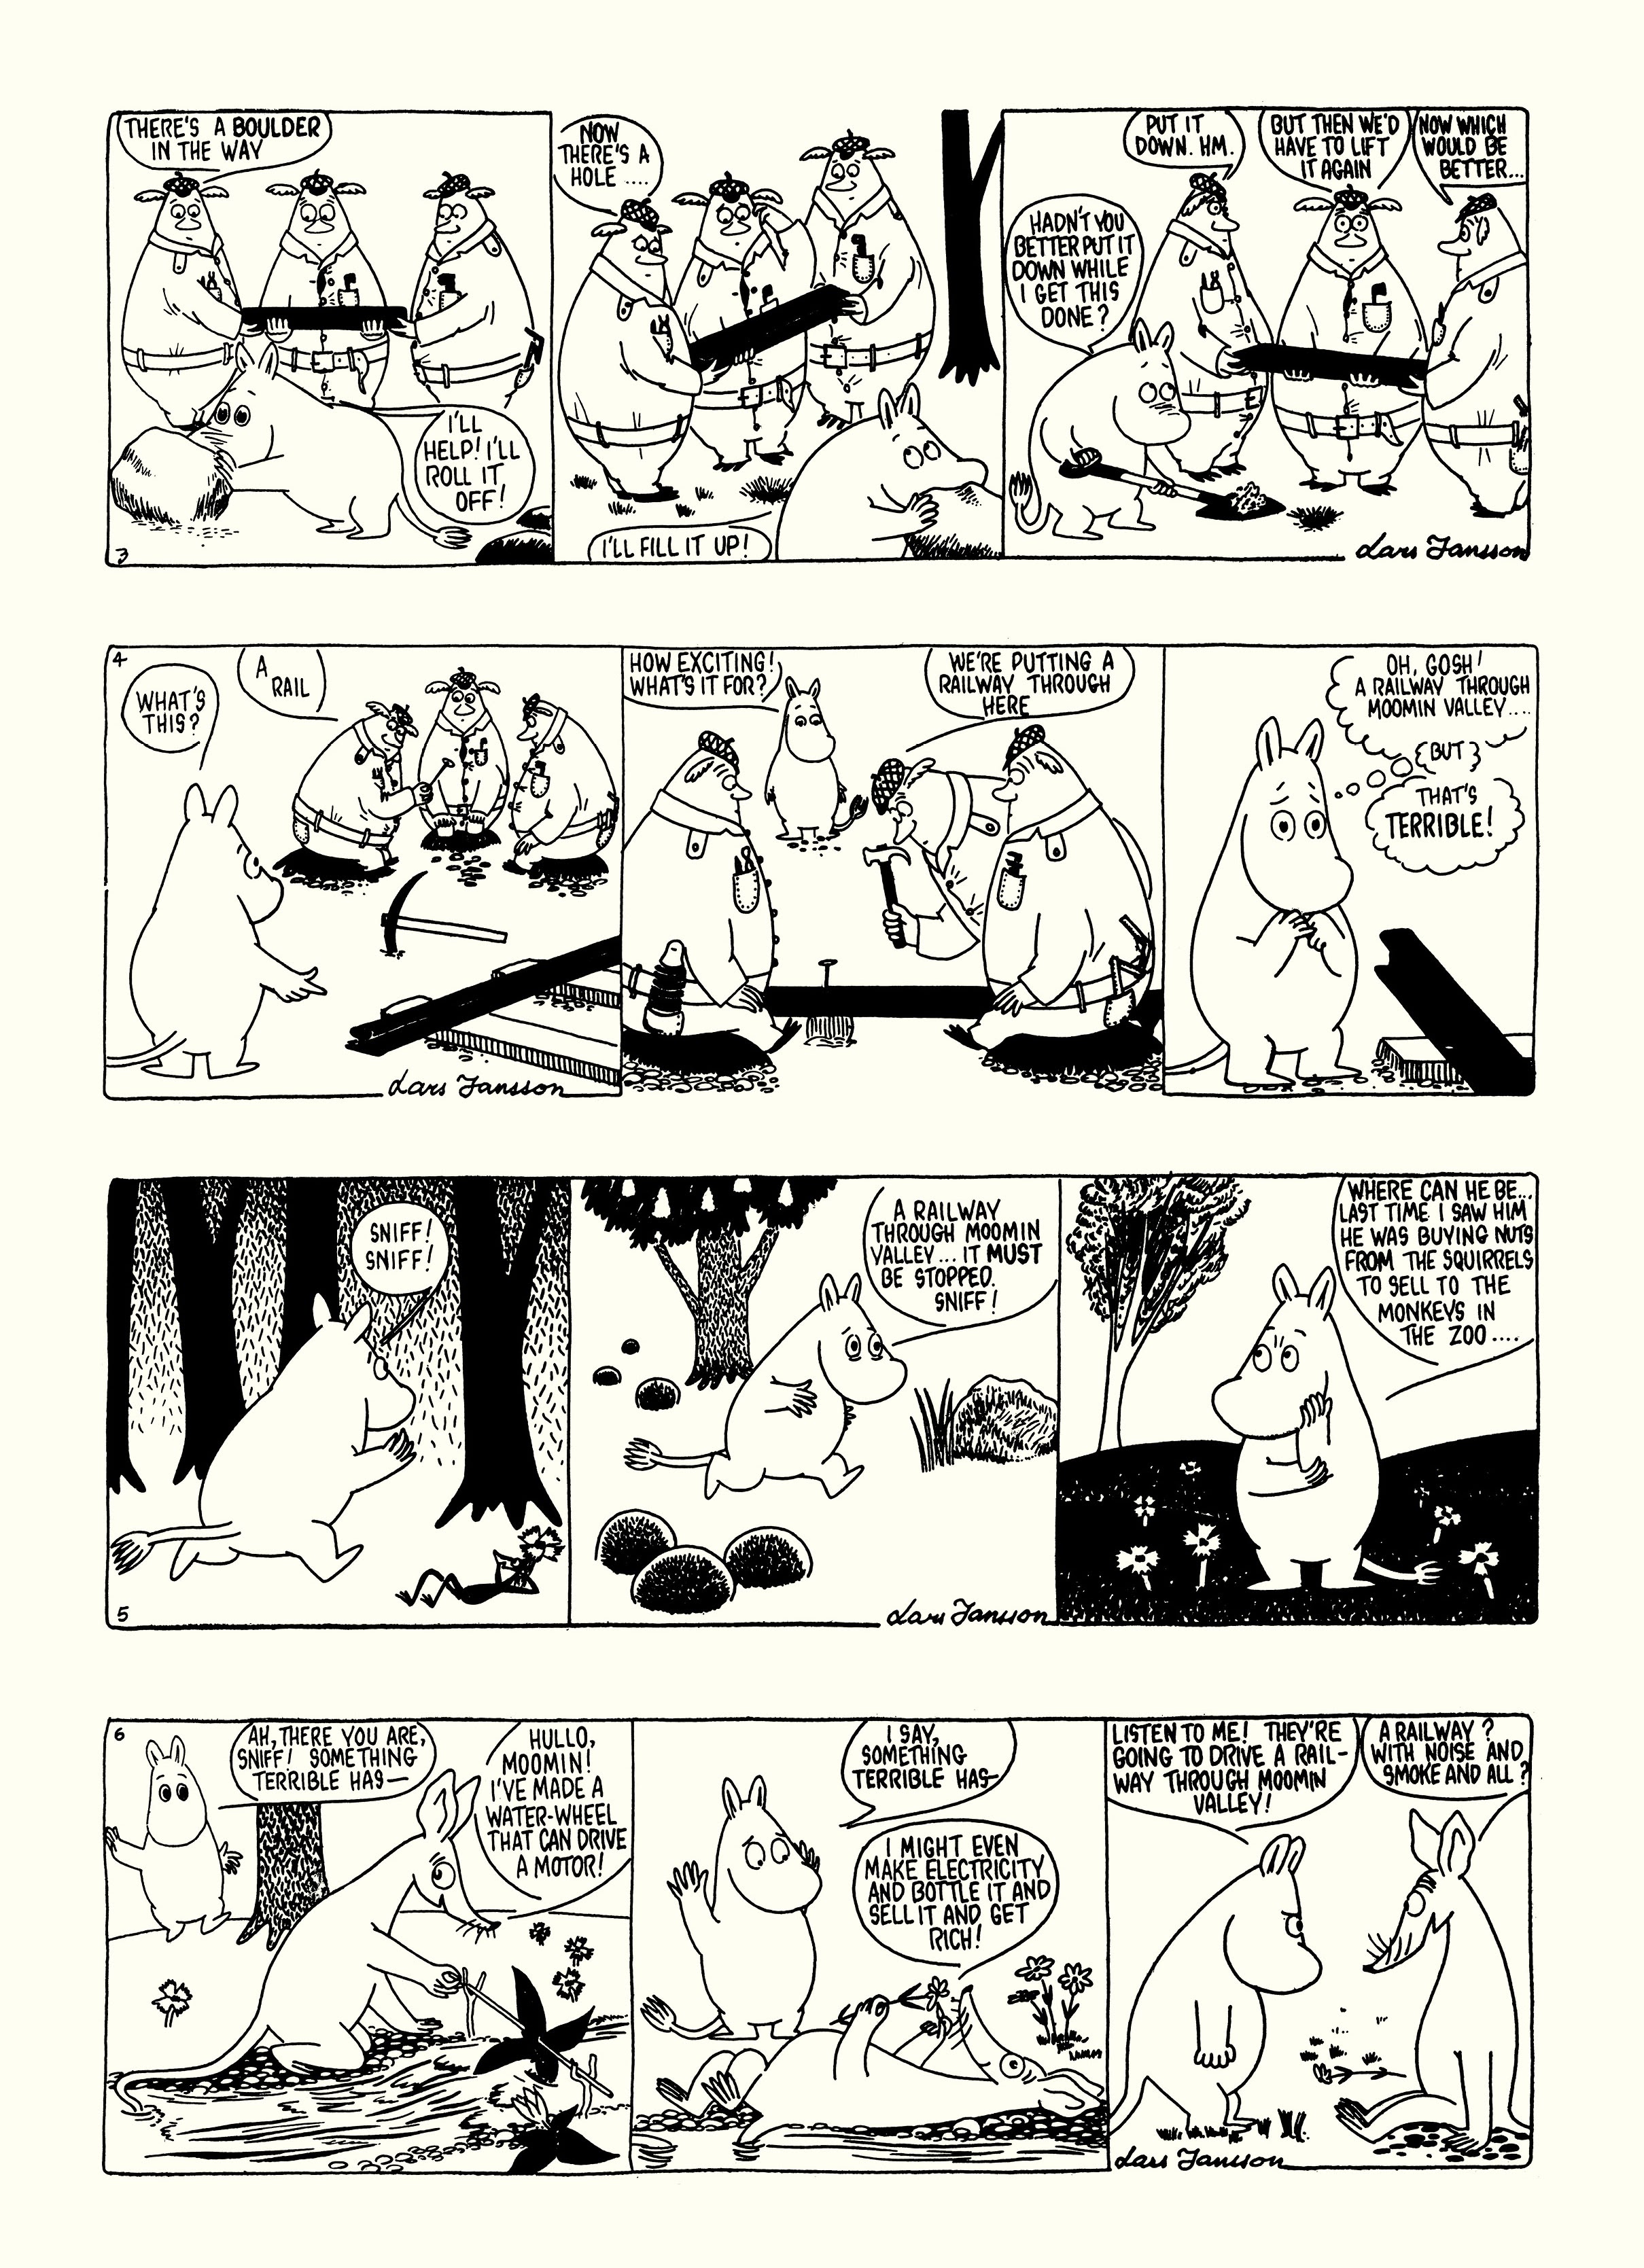 Read online Moomin: The Complete Lars Jansson Comic Strip comic -  Issue # TPB 6 - 27